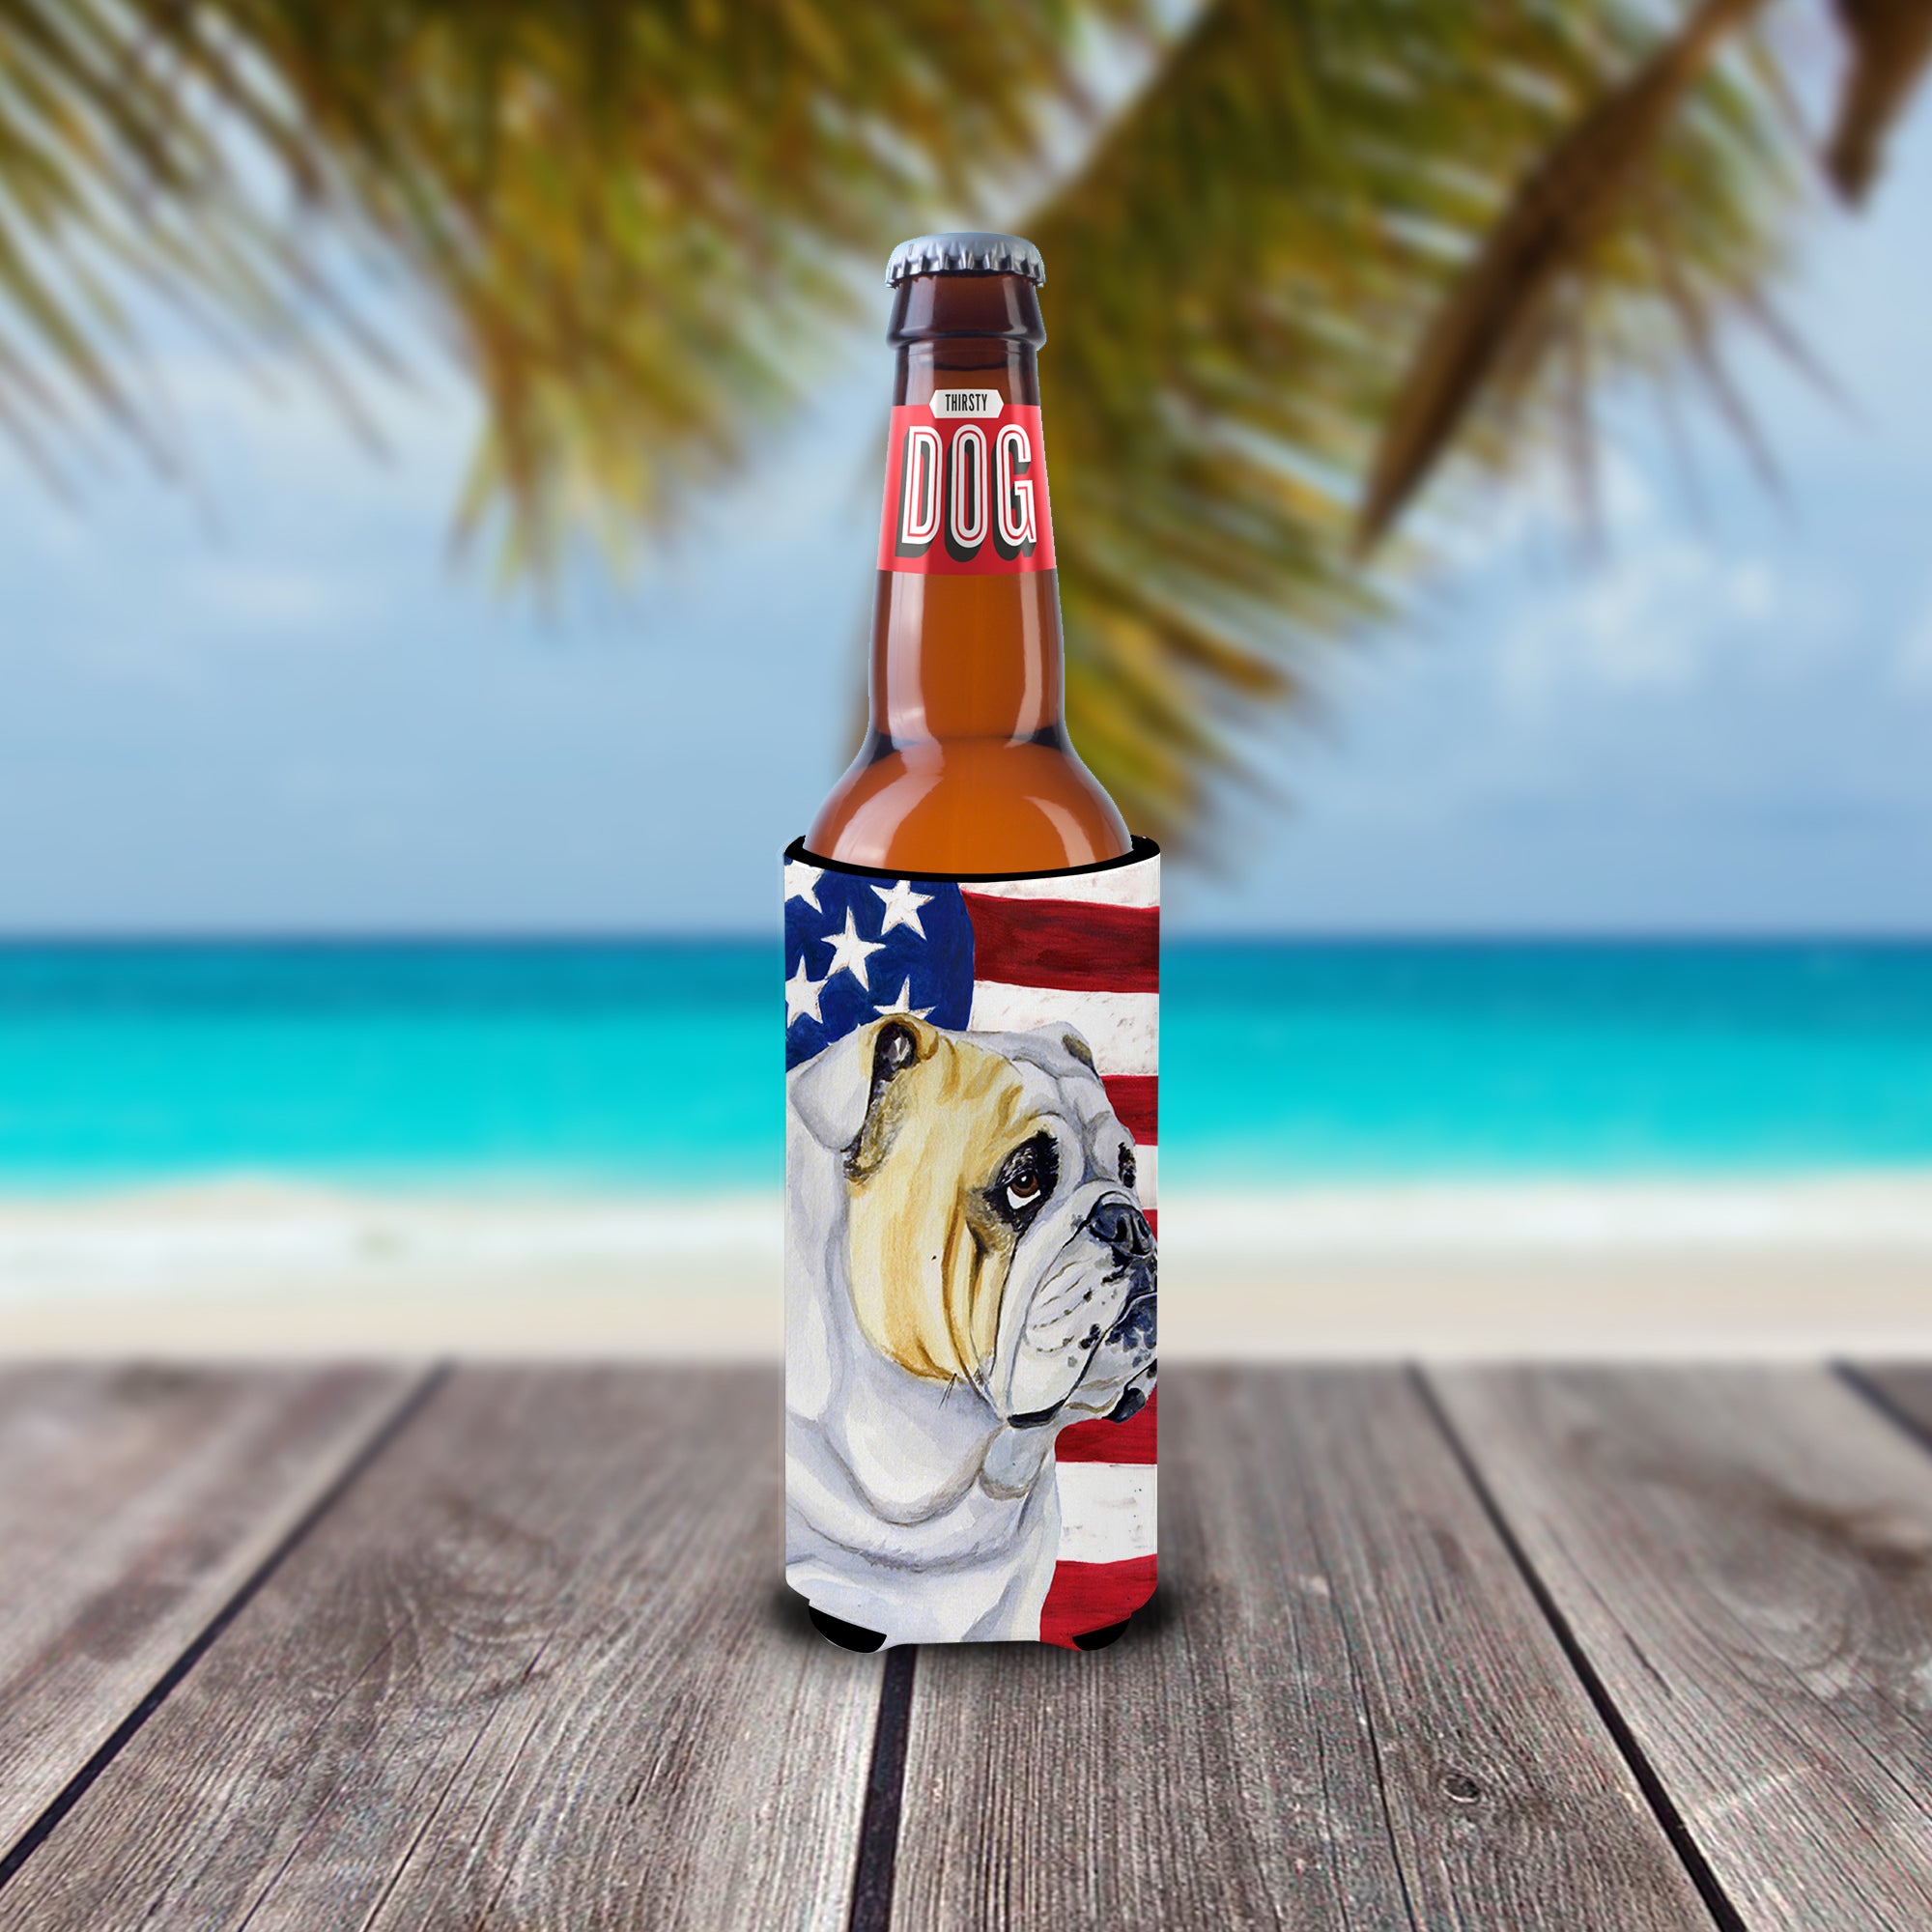 USA American Flag with English Bulldog Ultra Beverage Insulators for slim cans LH9018MUK.